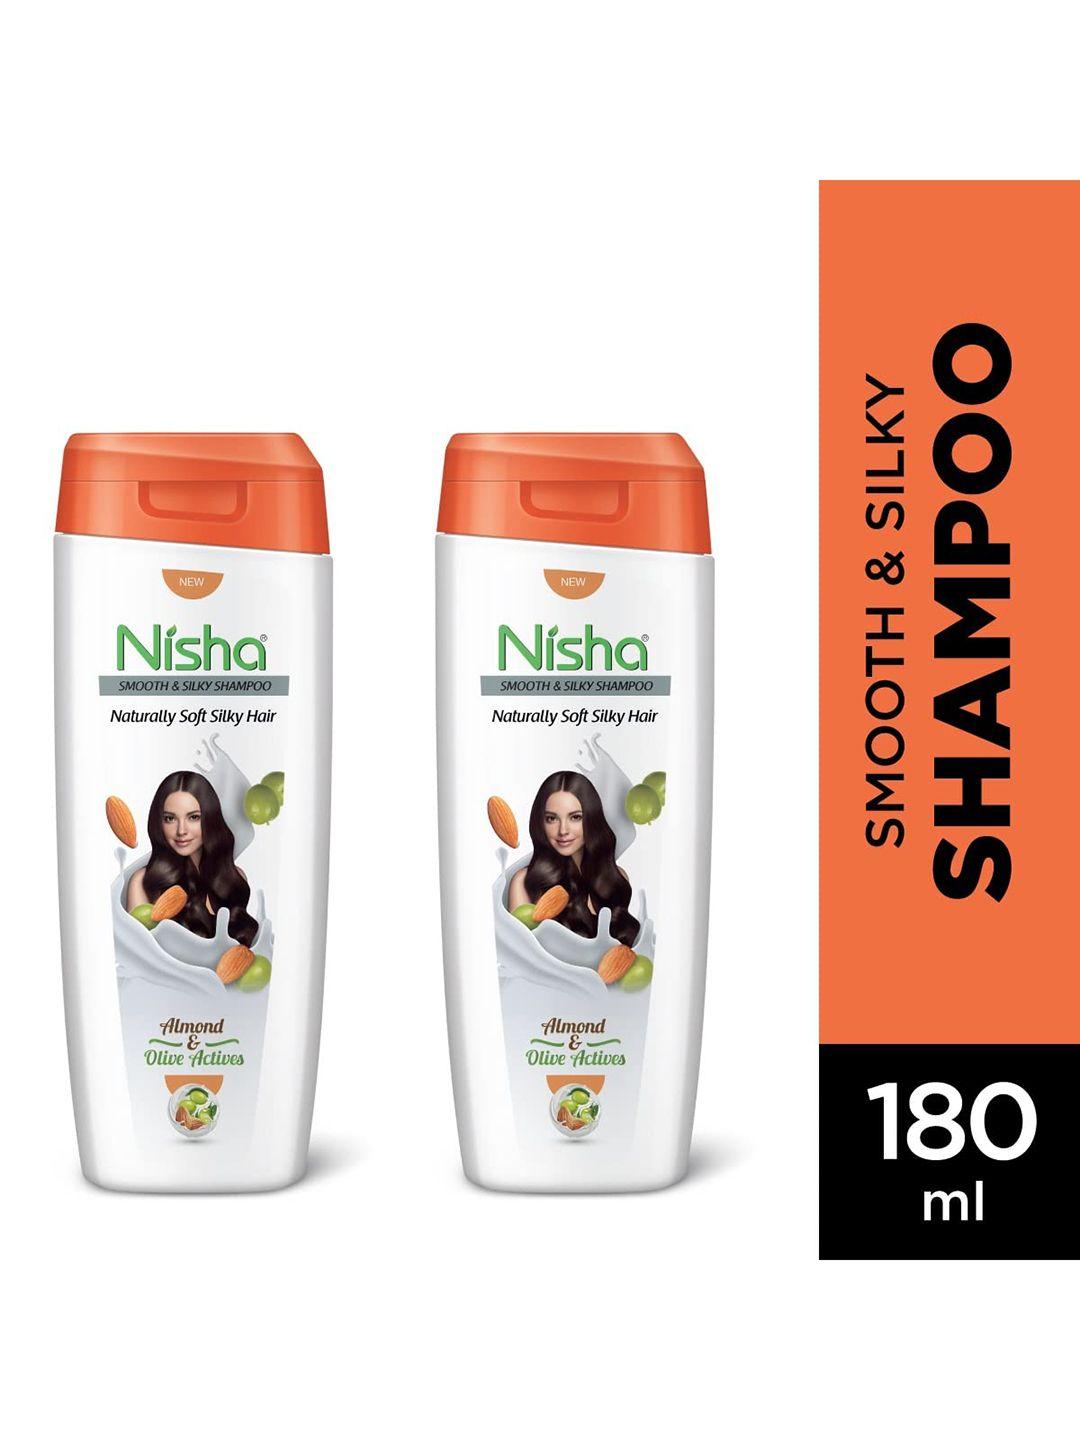 nisha set of 2 naturally smooth & silky hair shampoo with almond & olive active -180 ml